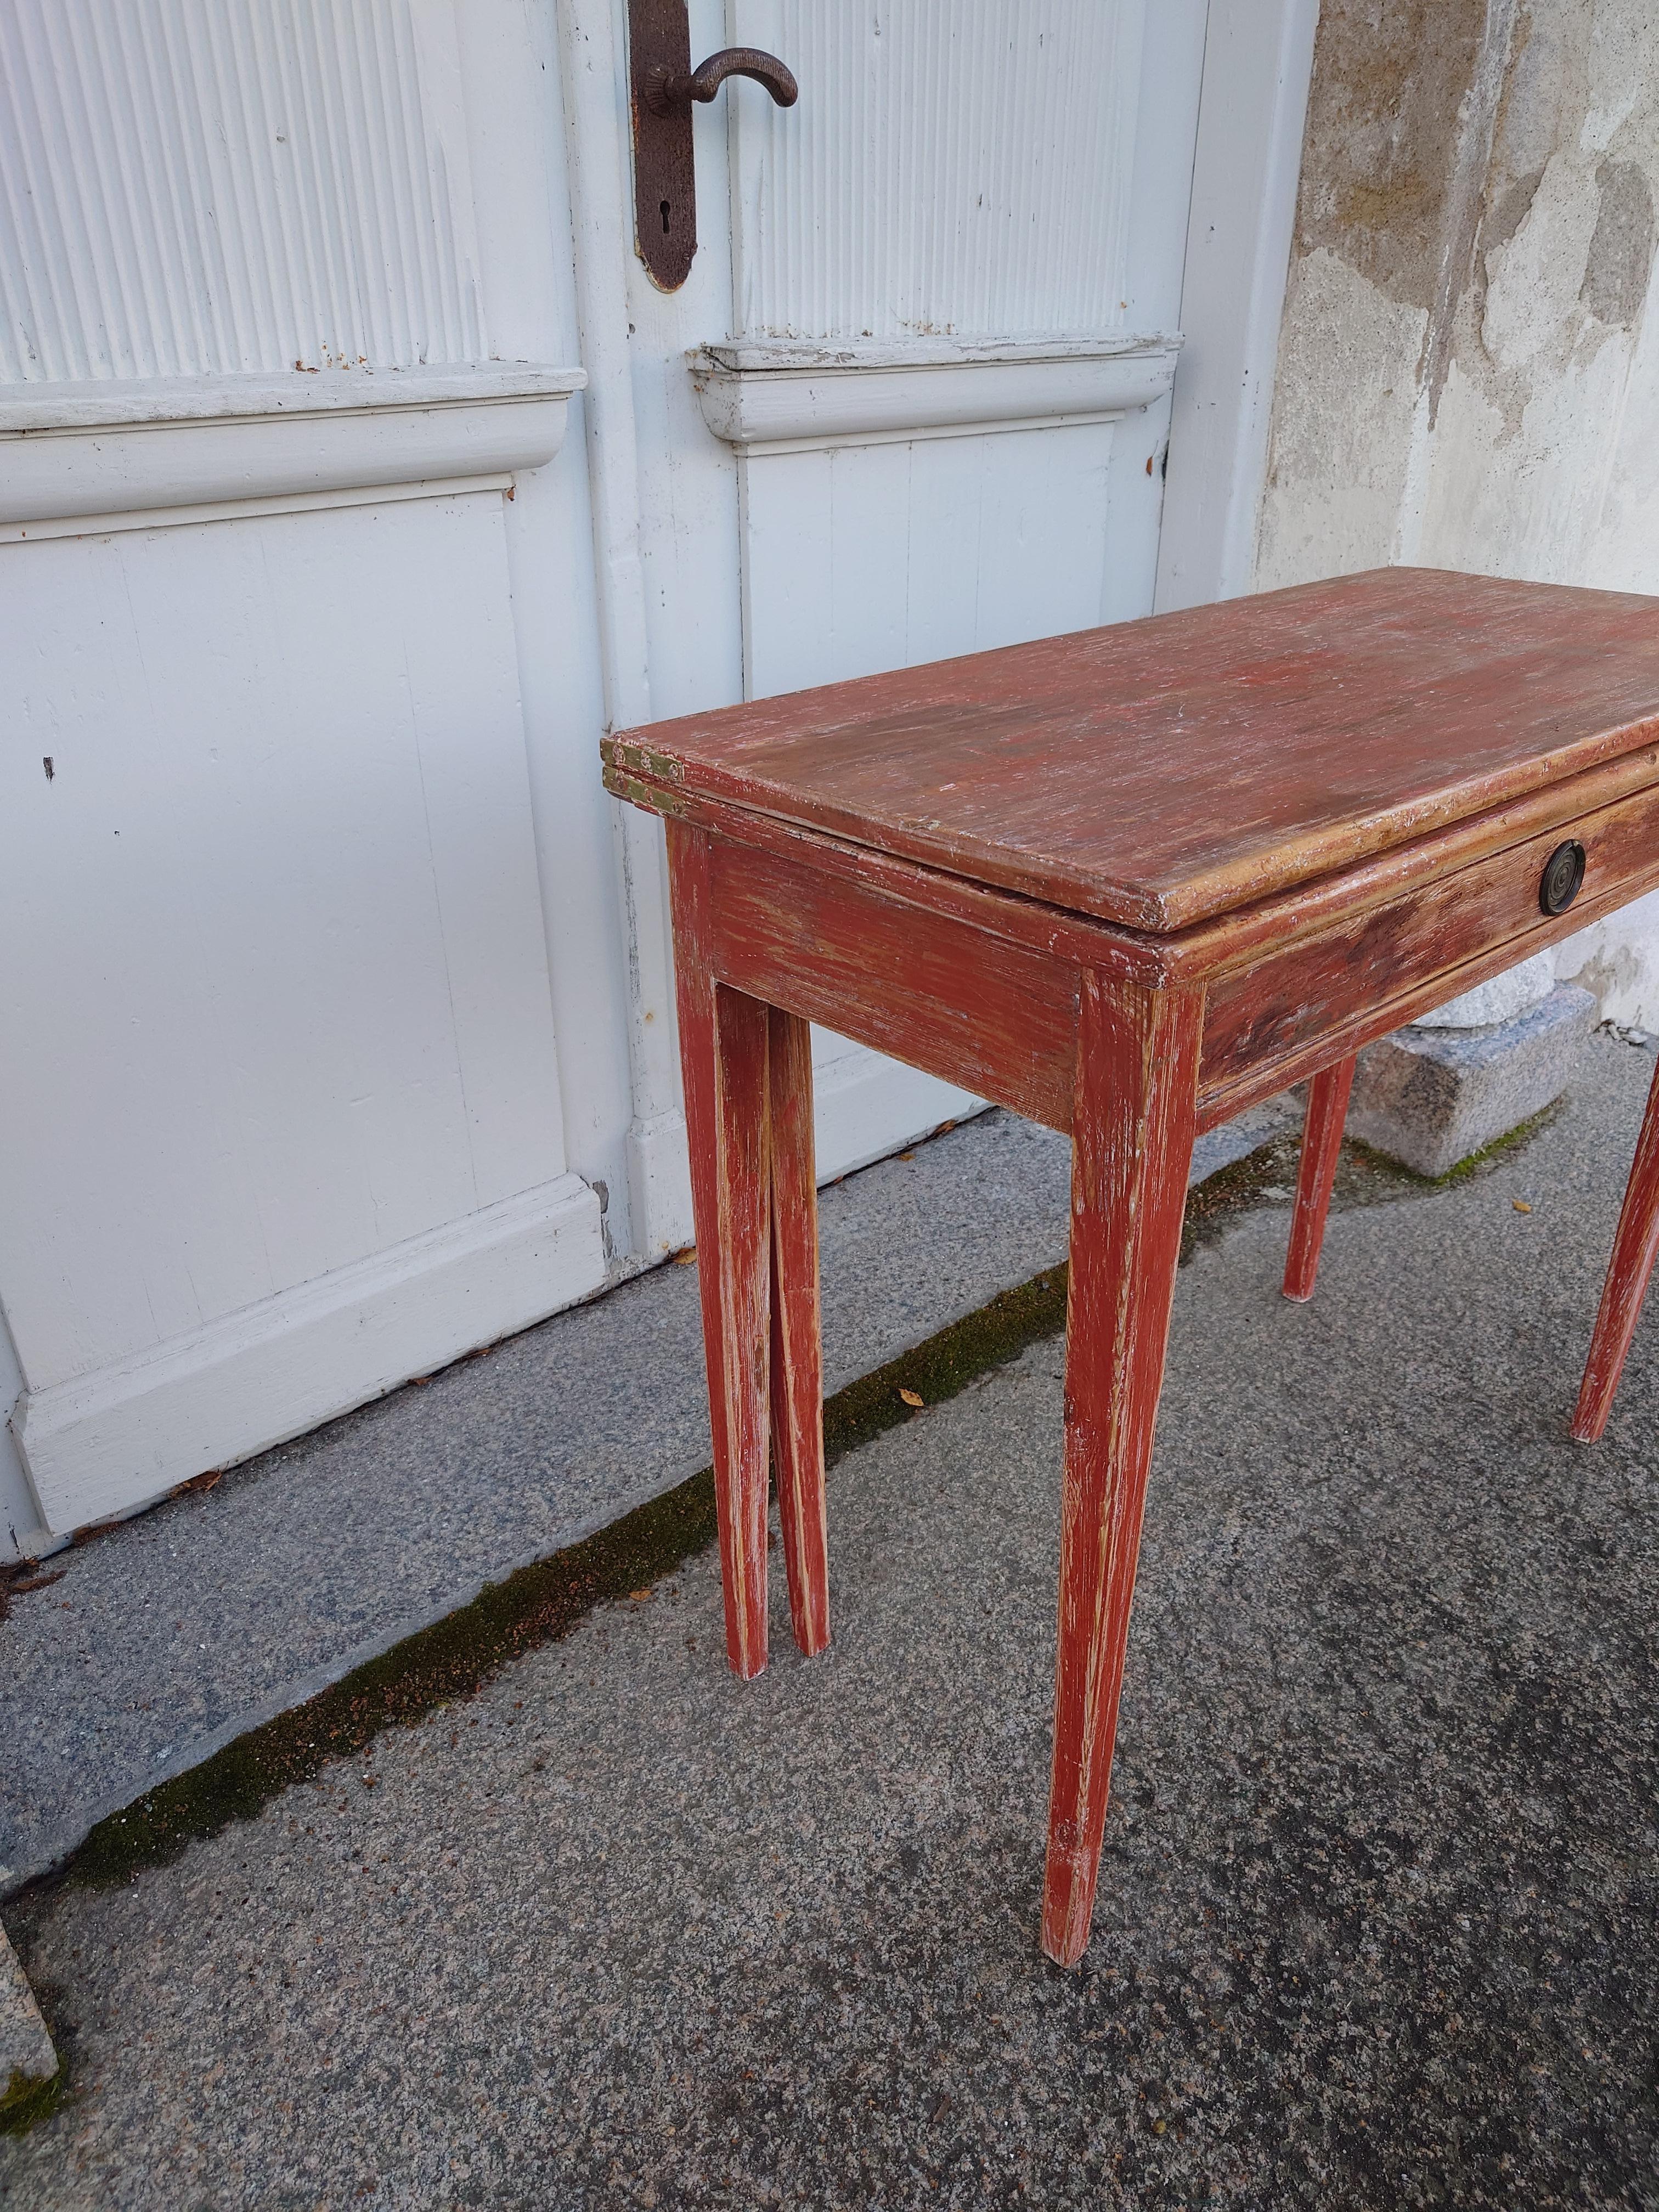  19th Century Swedish antique  rustic genuine Game Table for Playing games   In Good Condition For Sale In Boden, SE